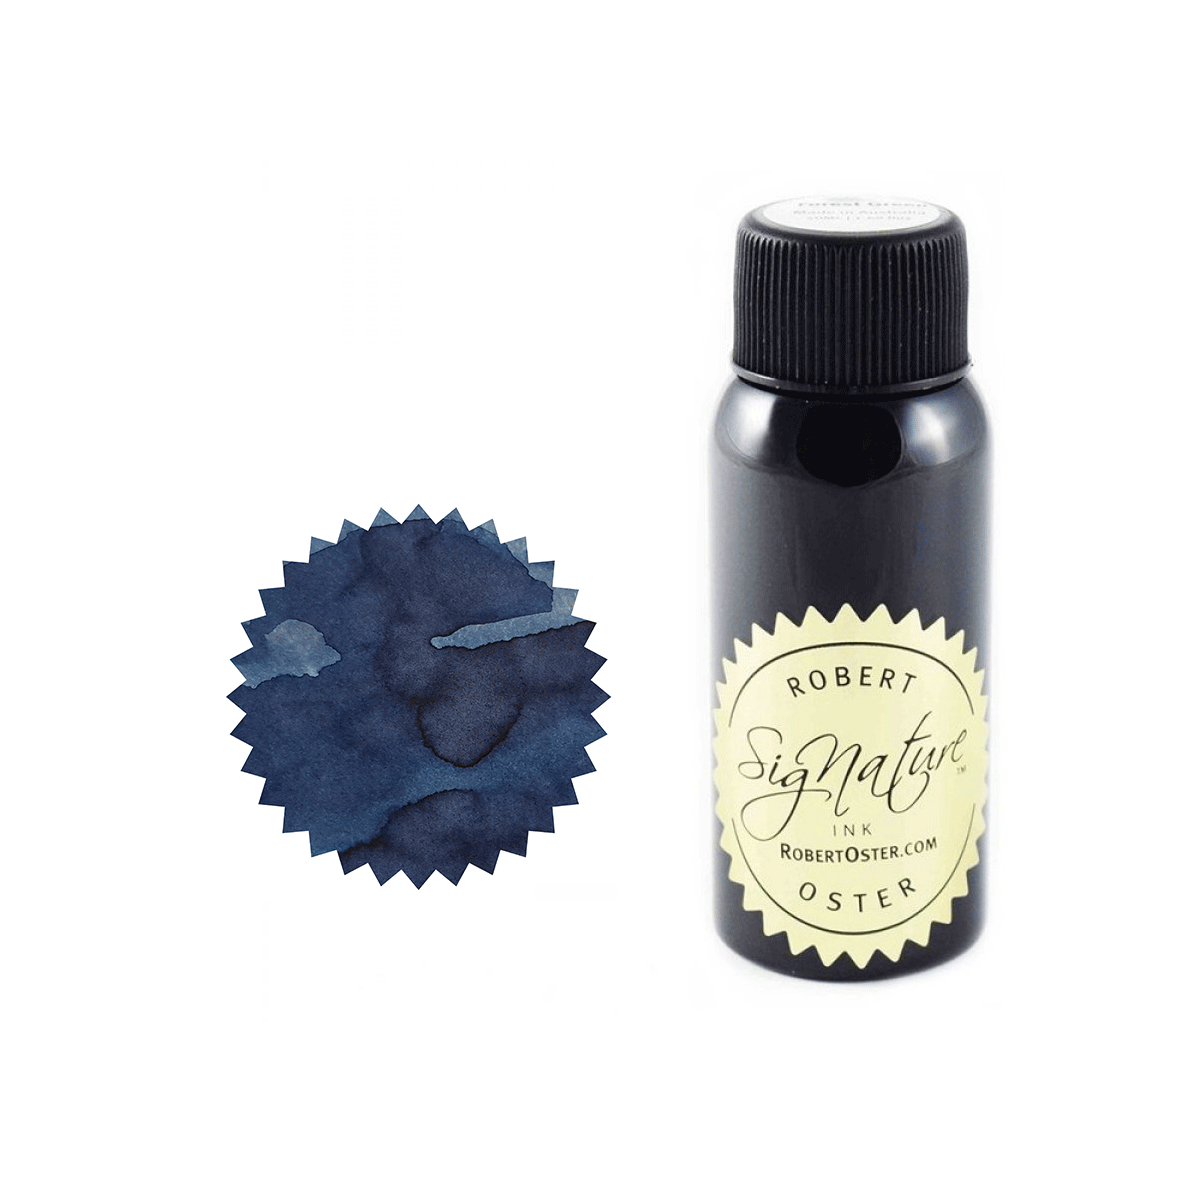 Robert Oster Signature Ink Bottle Blue Night - Pencraft the boutique